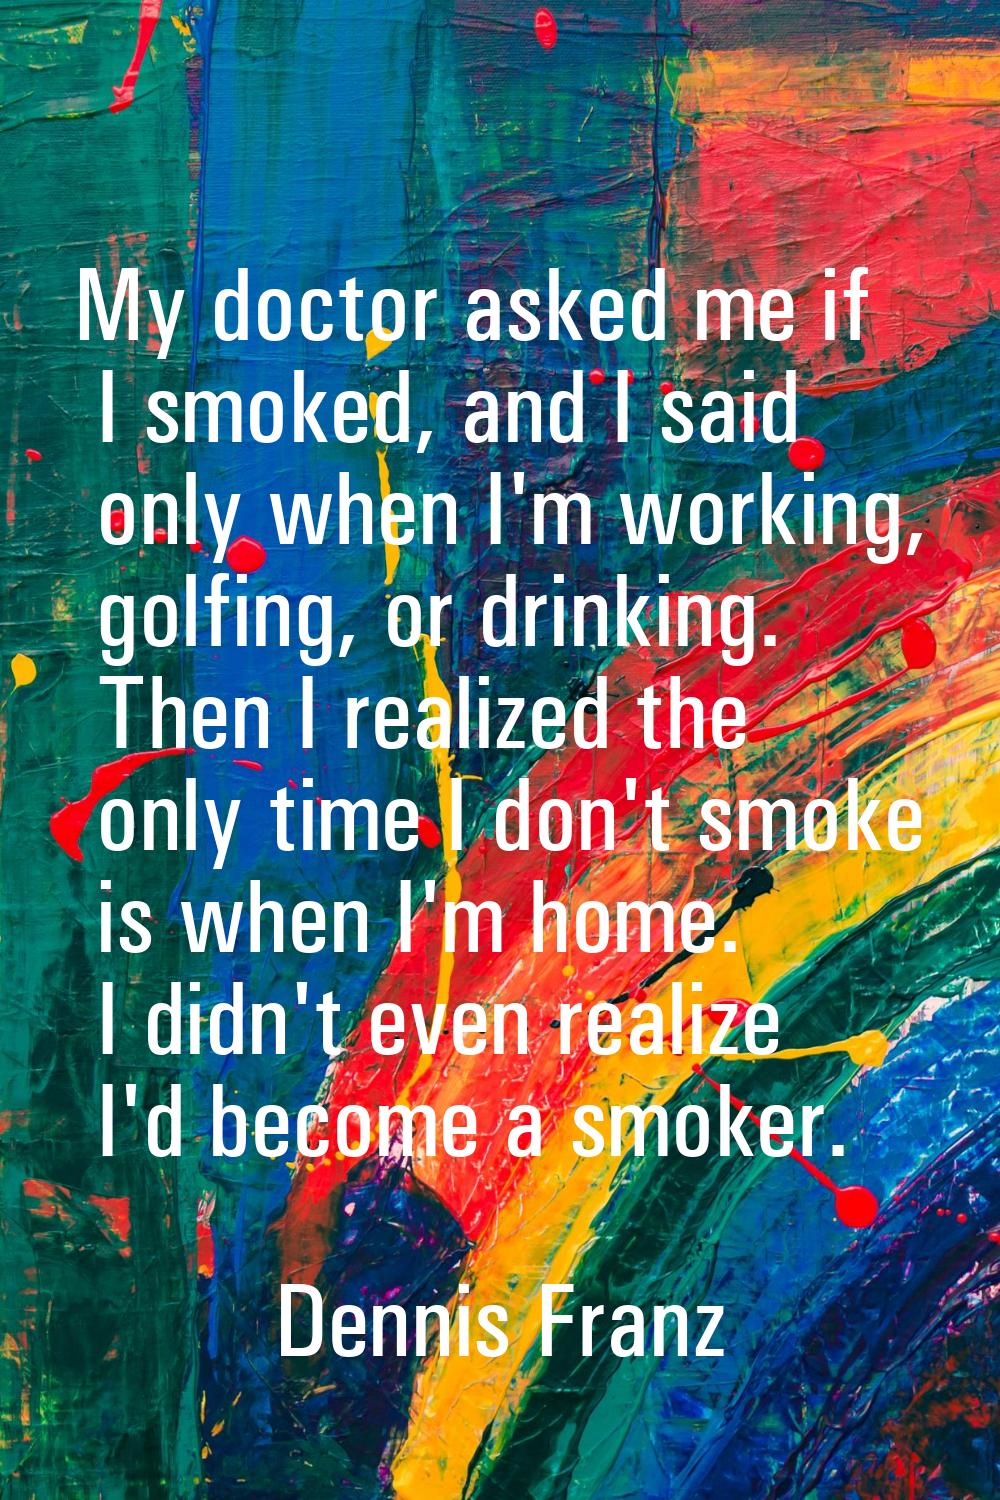 My doctor asked me if I smoked, and I said only when I'm working, golfing, or drinking. Then I real